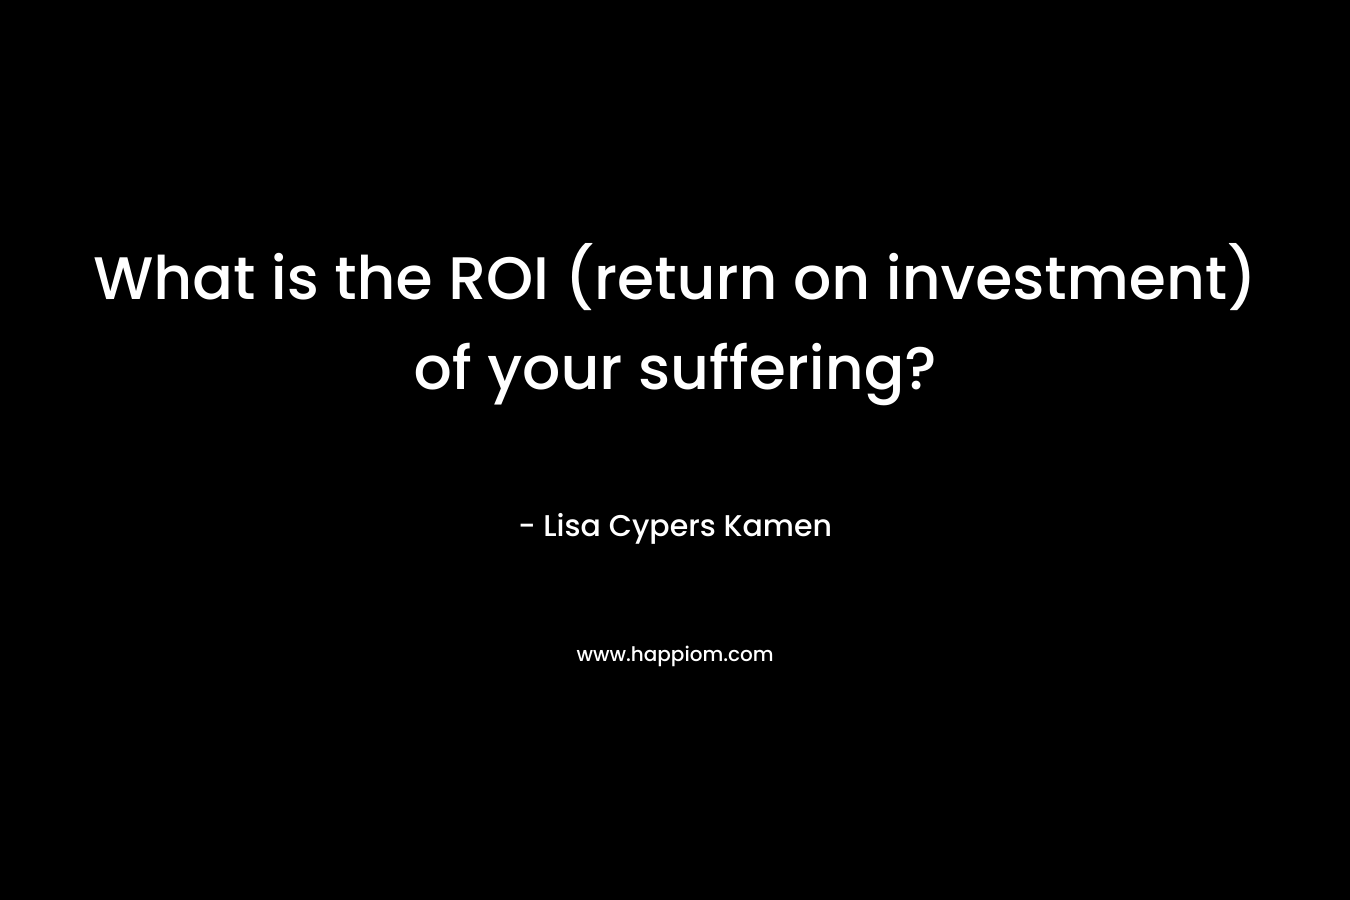 What is the ROI (return on investment) of your suffering?